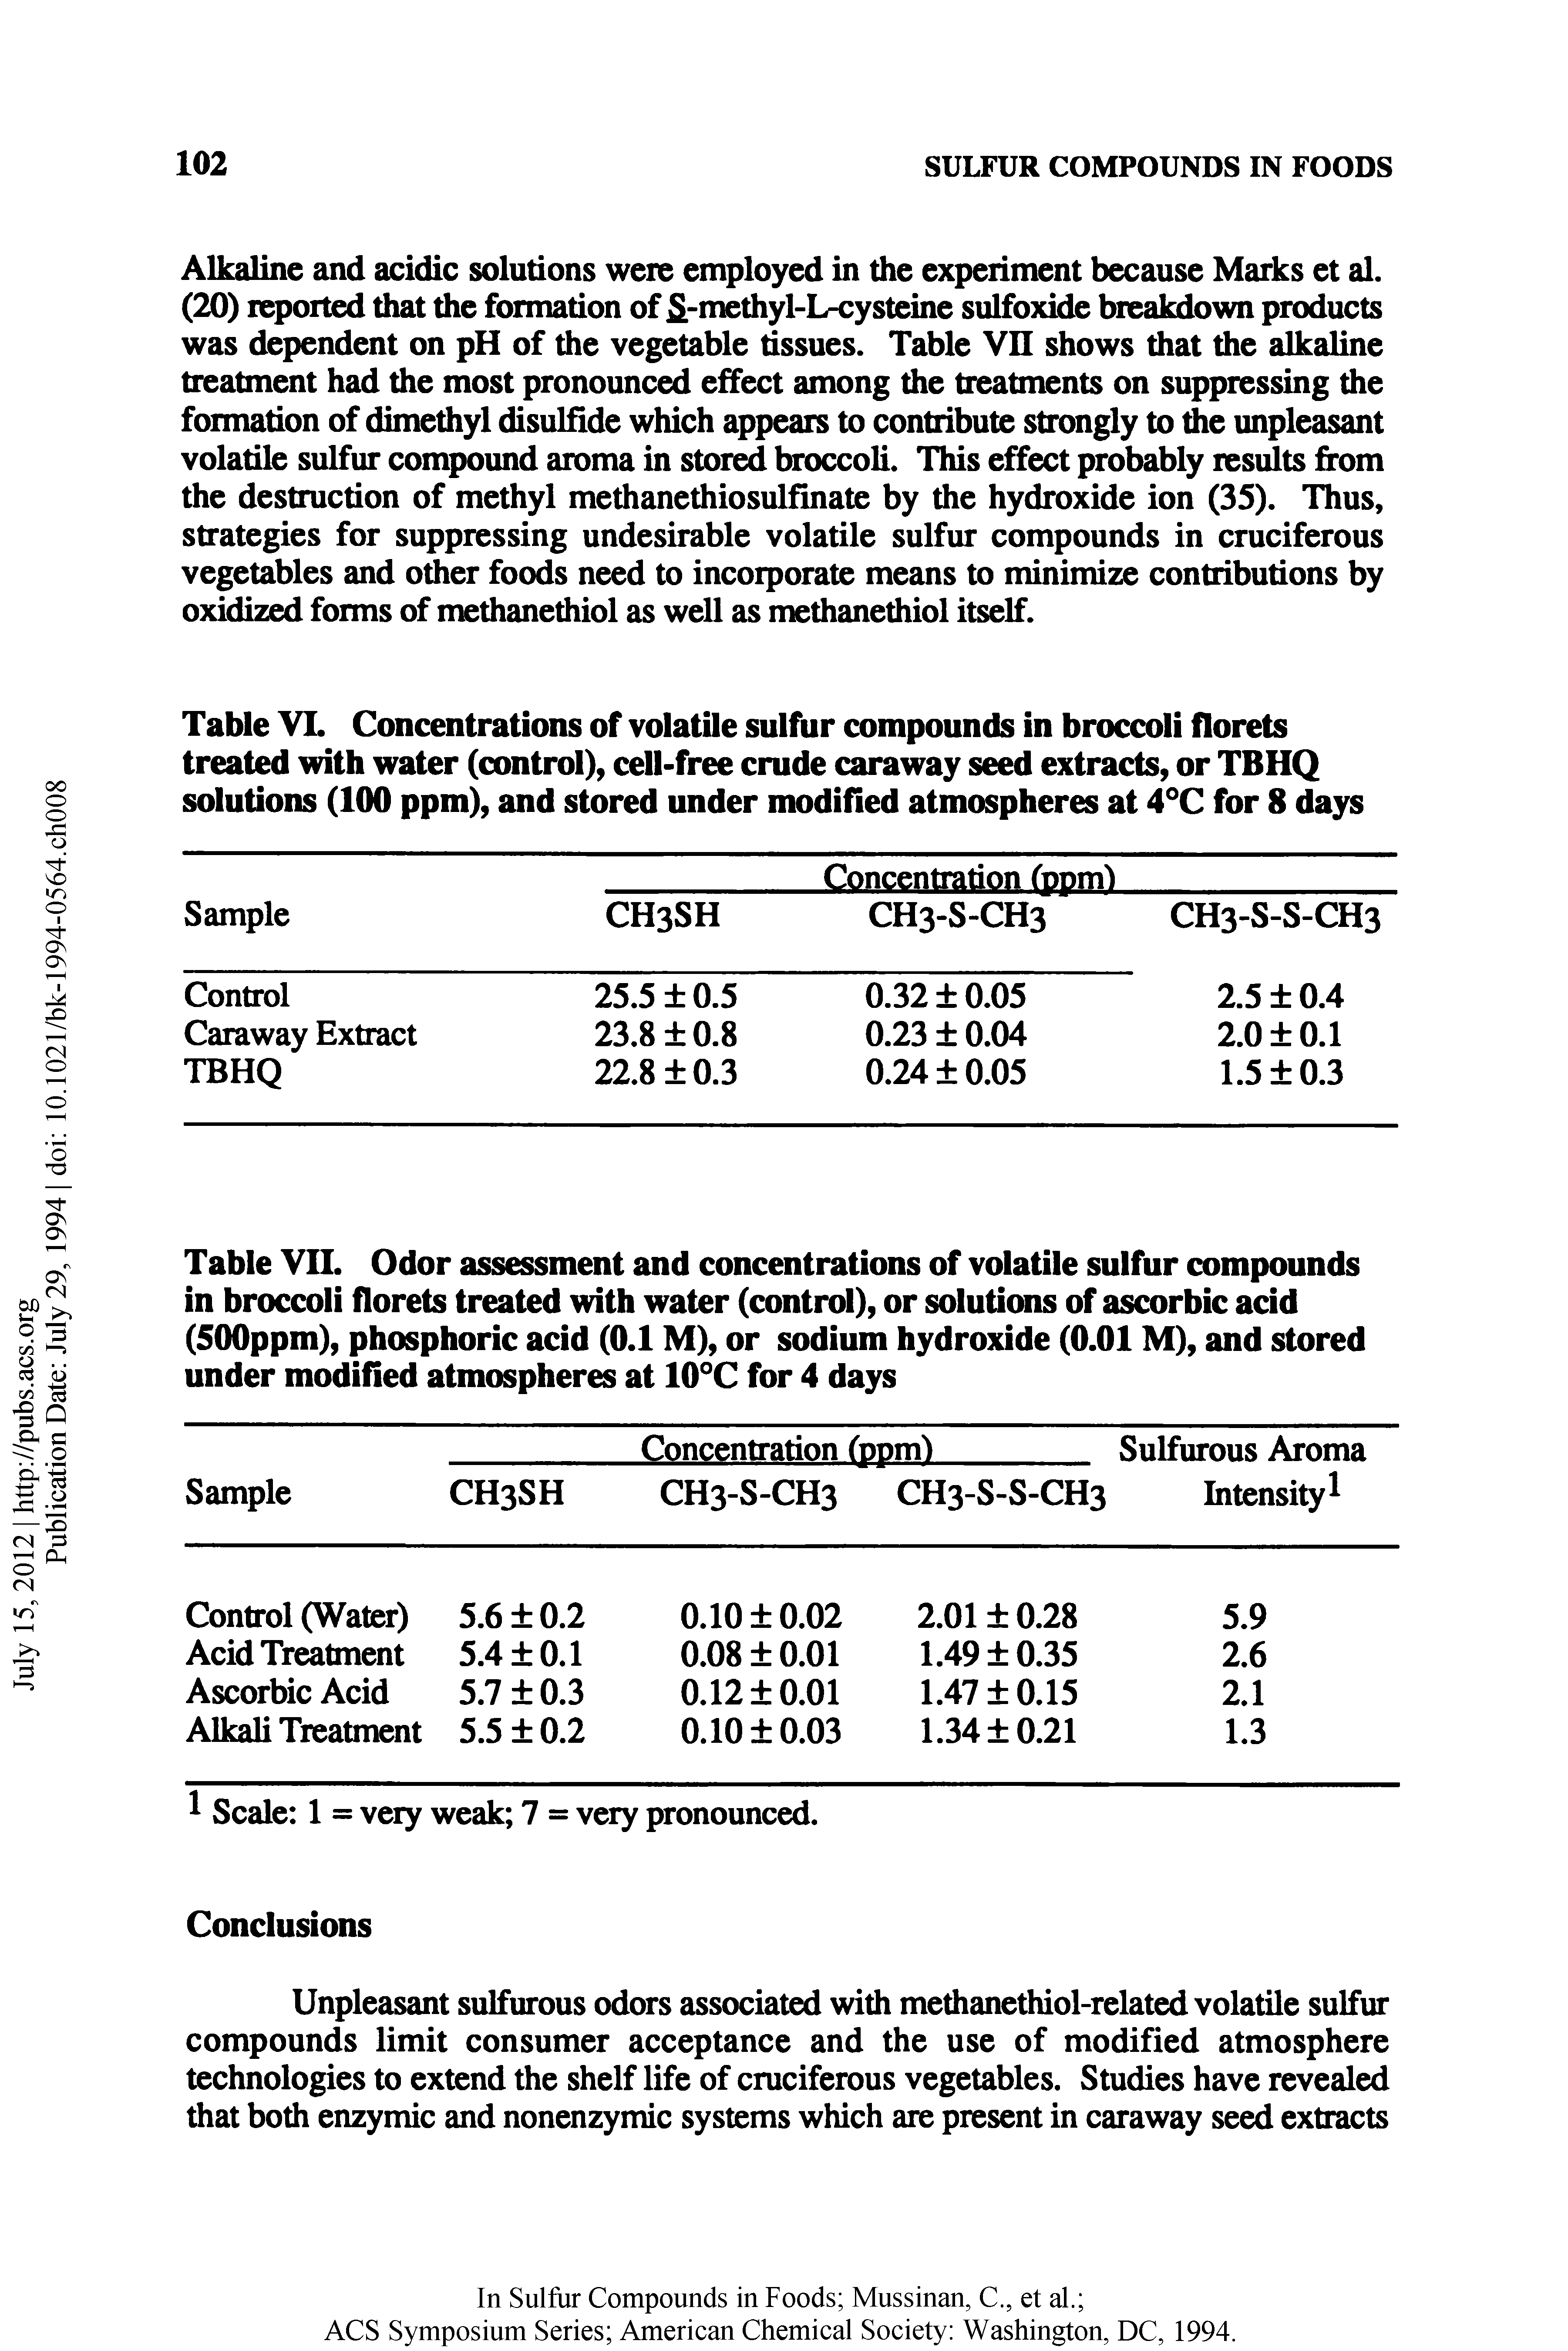 Table YII. Odor assessment and concentrations of volatile sulfur compounds in broccoli florets treated with water (control), or solutions of ascorbic acid (SOOppm), phosphoric acid (0.1 M), or sodium hydroxide (0.01 M), and stored under modified atmospheres at 10°C for 4 days...